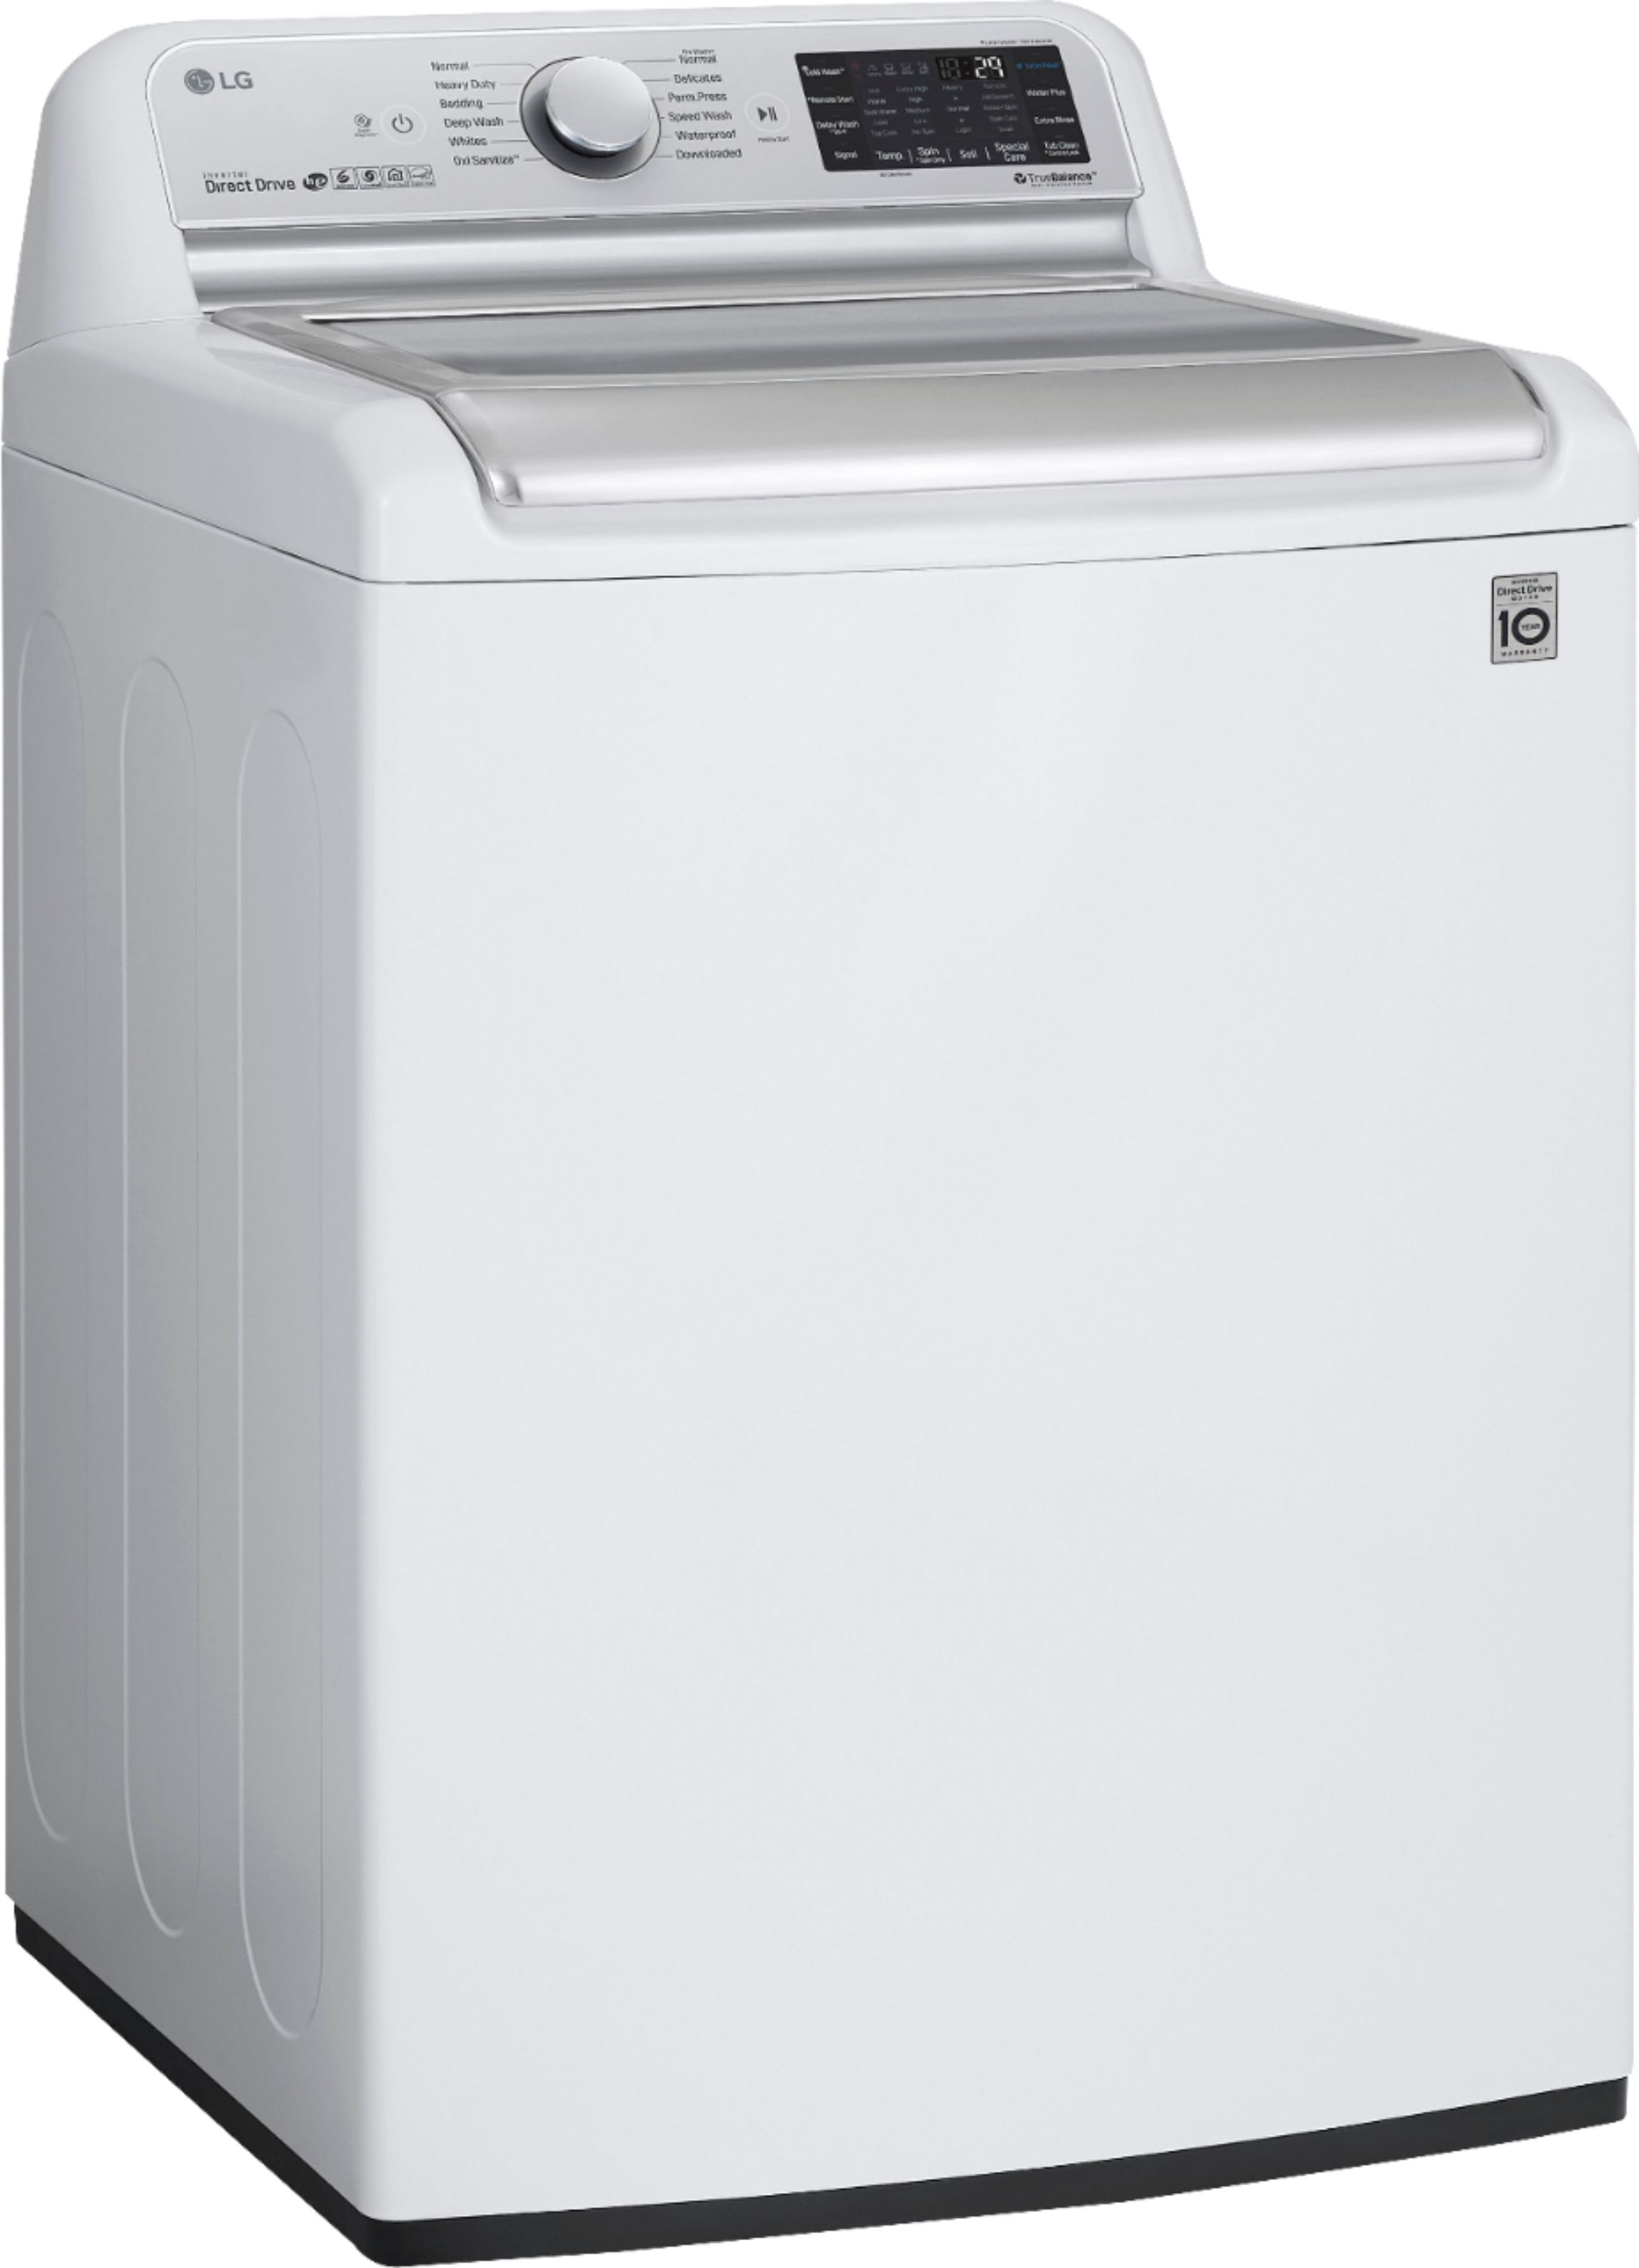 Angle View: LG - 5.5 Cu. Ft. High-Efficiency Smart Top Load Washer with TurboWash3D Technology - White